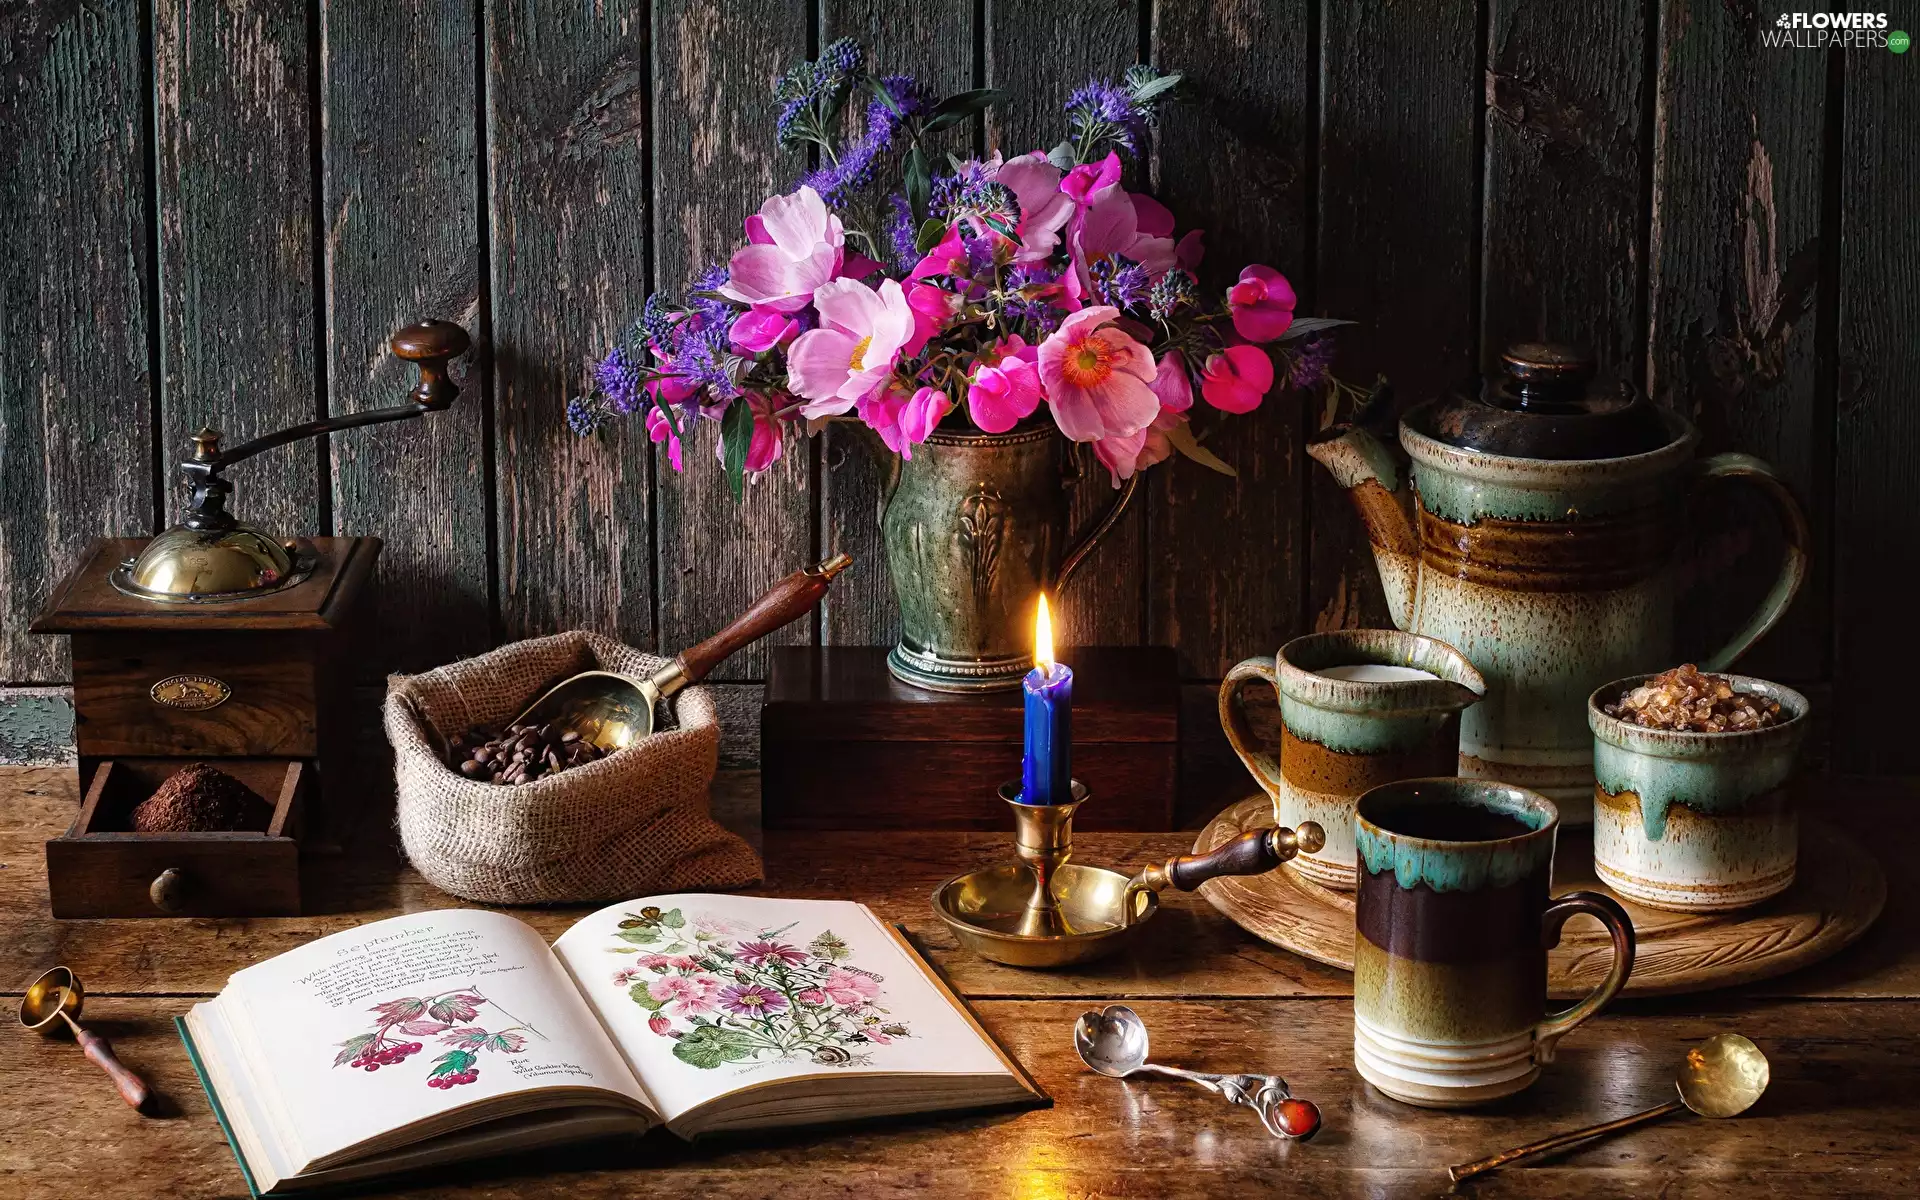 mill, Flowers, grains, coffee, Book, composition, sugar-bowl, Jugs, bouquet, cups, candle